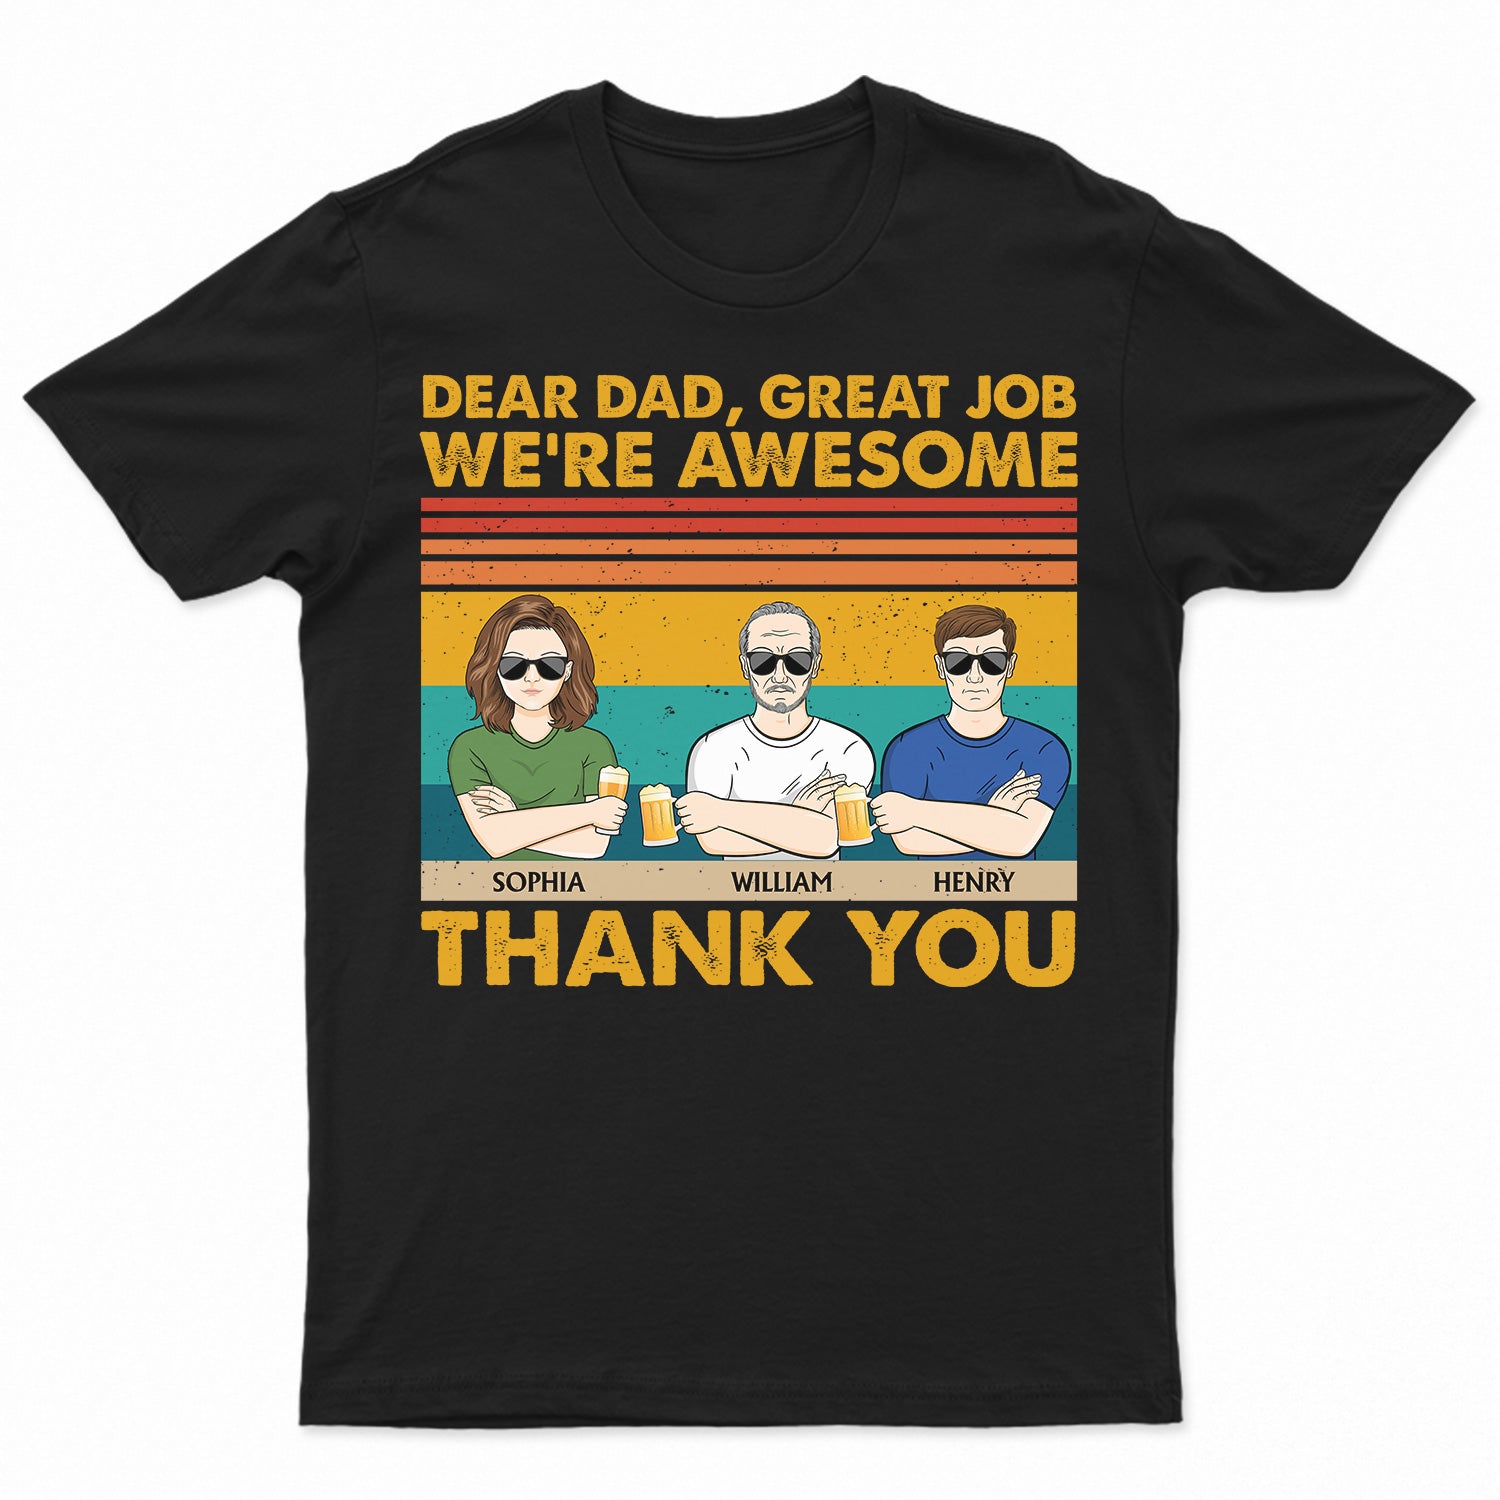 Dear Dad Great Job We're Awesome Thank You Adult Children - Funny, Birthday Gift For Father, Papa, Husband - Personalized Custom T Shirt